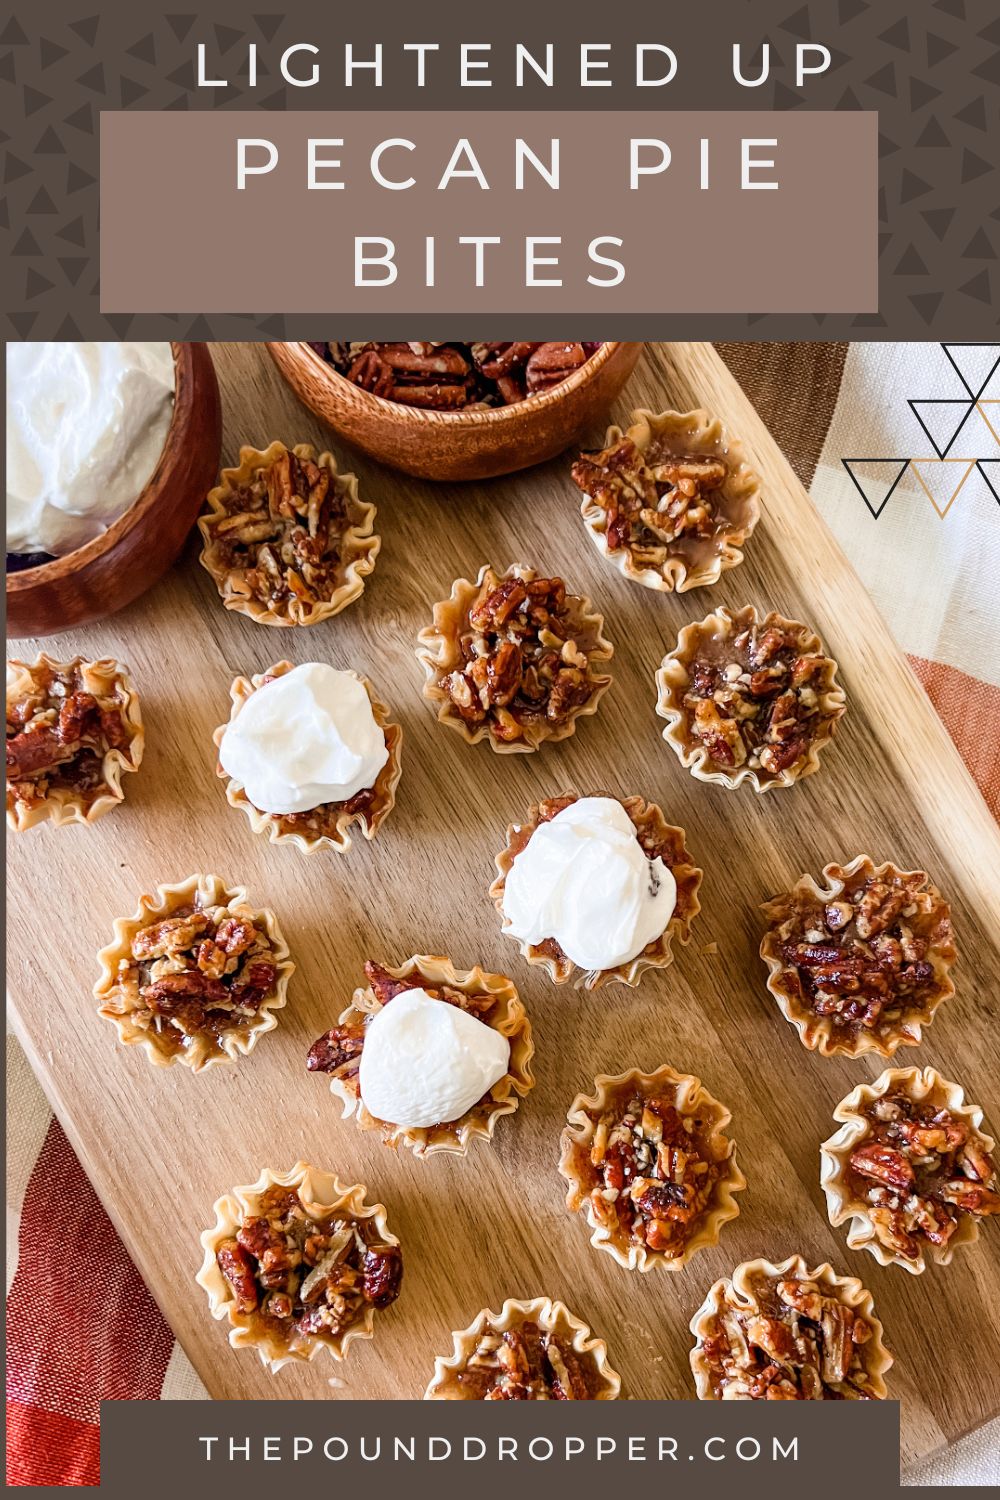 These Lightened Up Pecan Pie Bites are a healthier alternative to traditional pecan pies-and contain less fat, sugar, and calories without sacrificing the flavor! They are everything you love in pecan pie but in mini form! Perfect to make for your next holiday party!  via @pounddropper